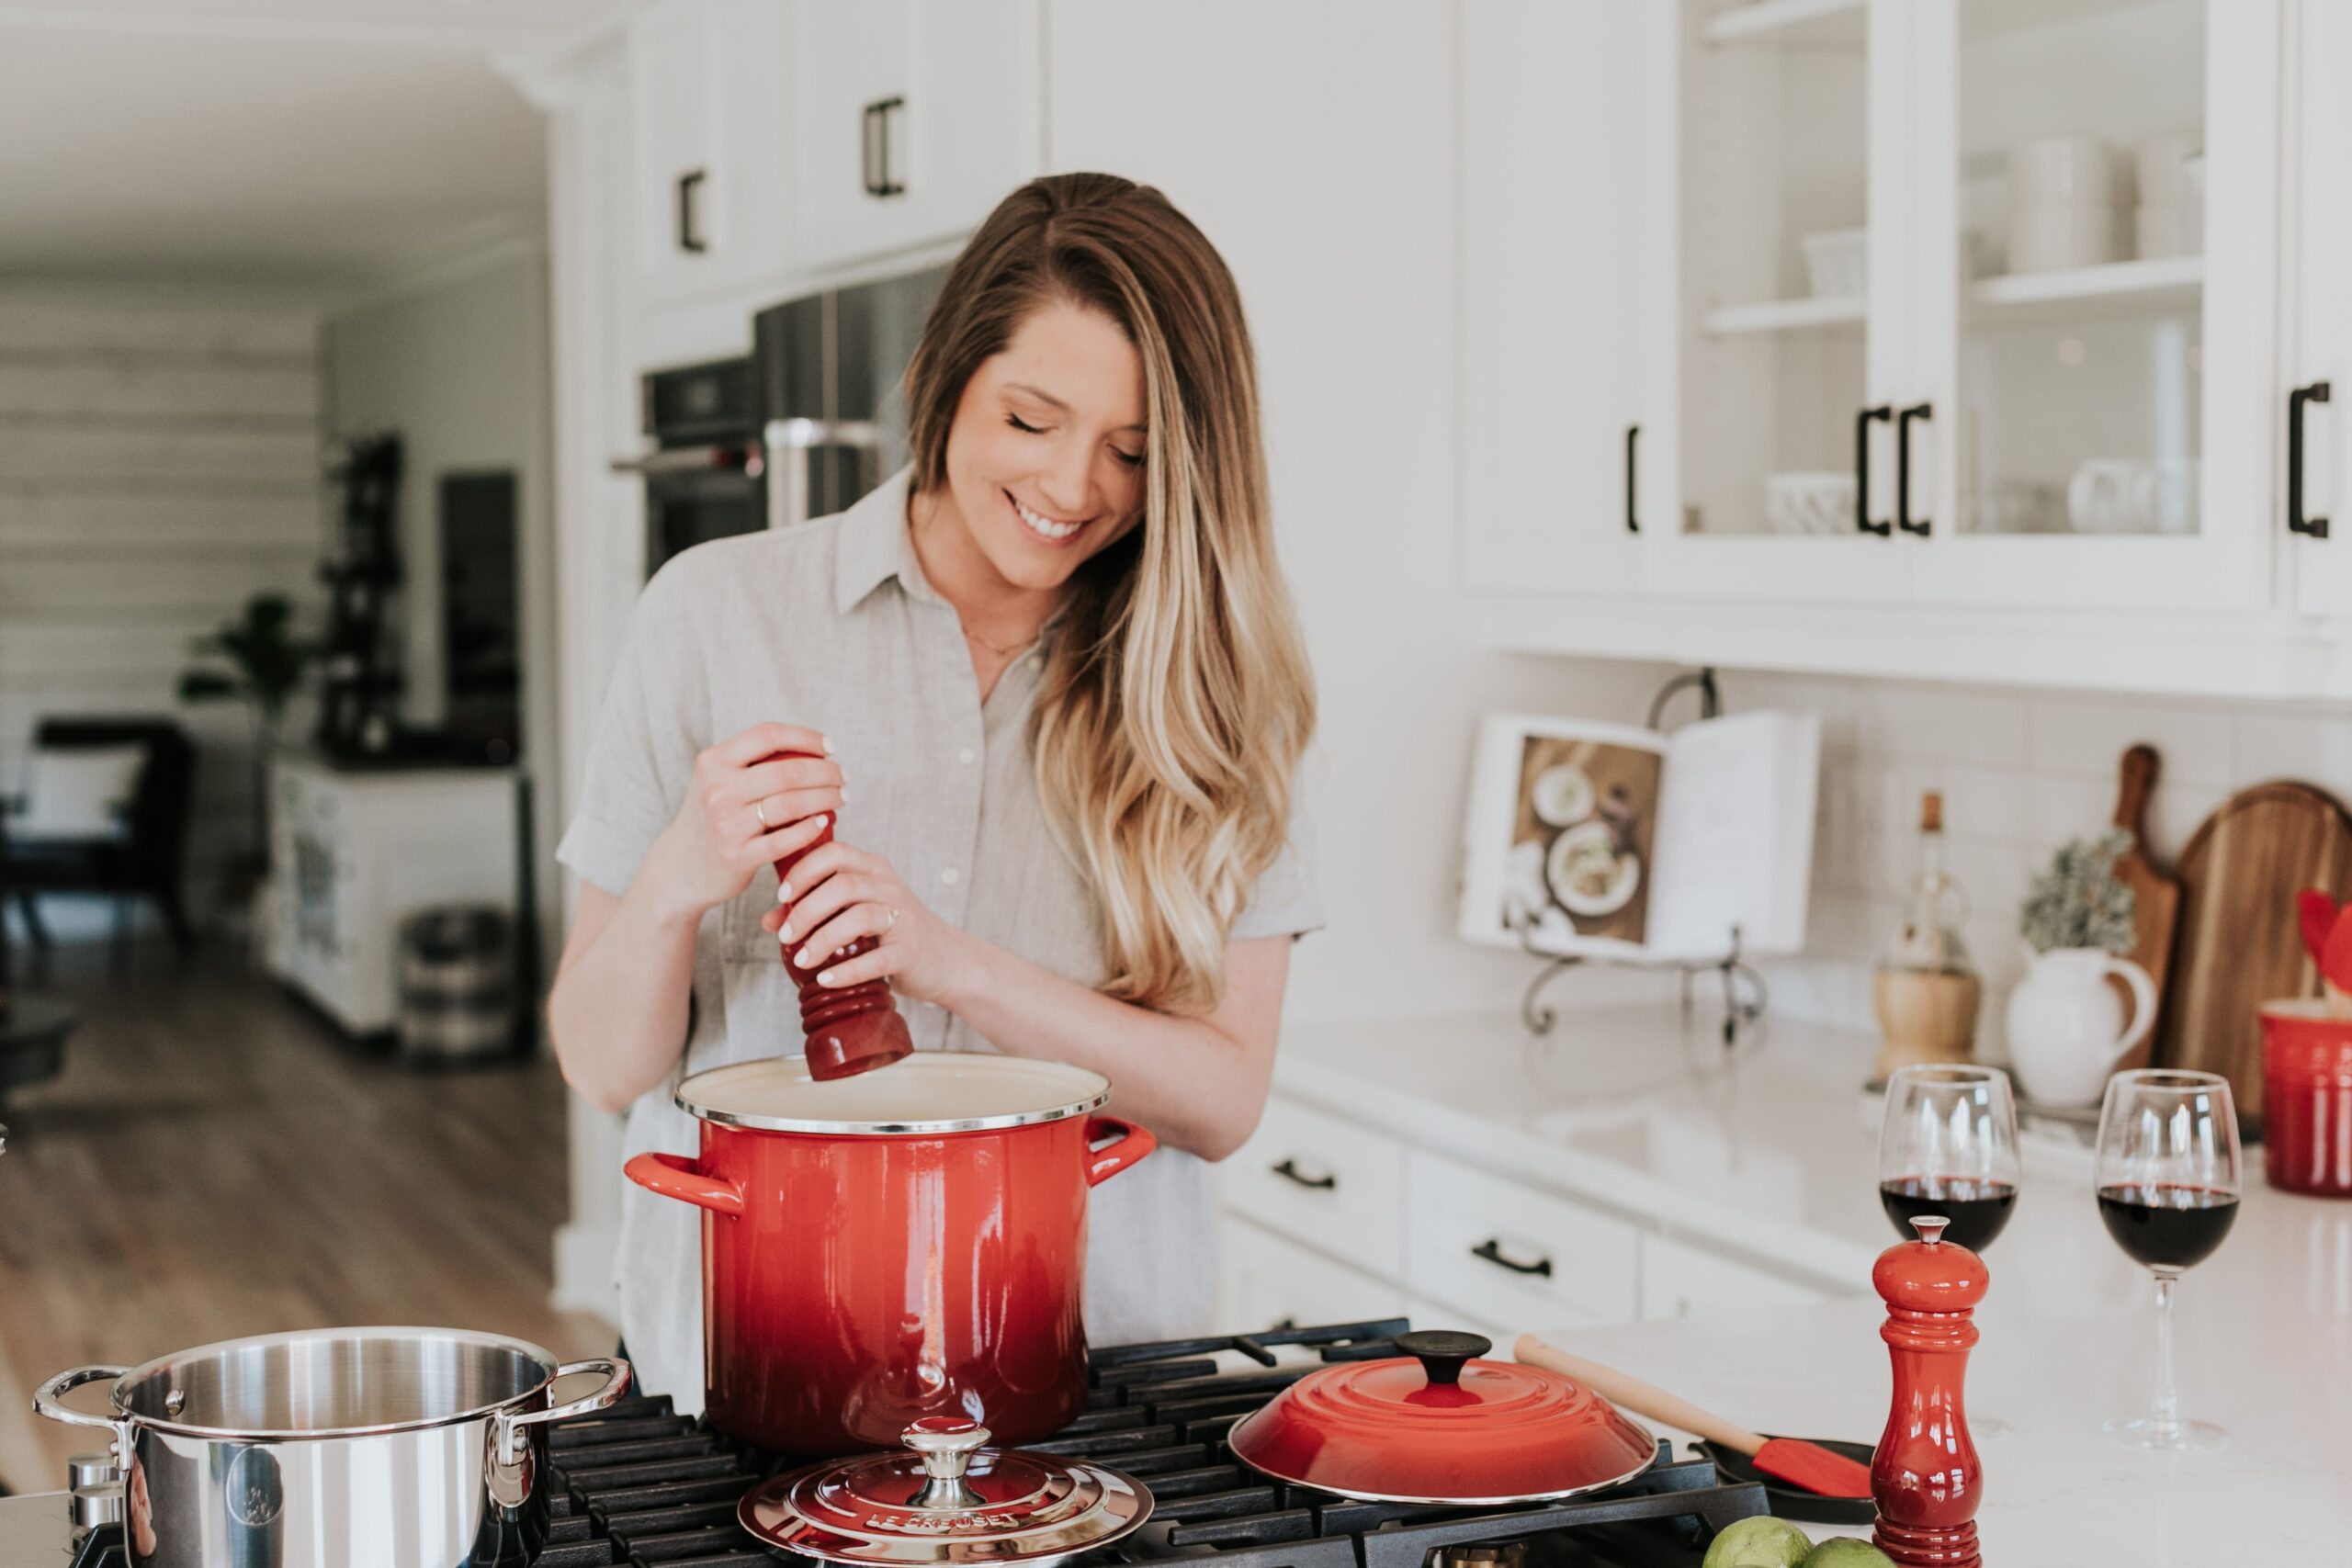 New Kitchen gadgets every girl will love